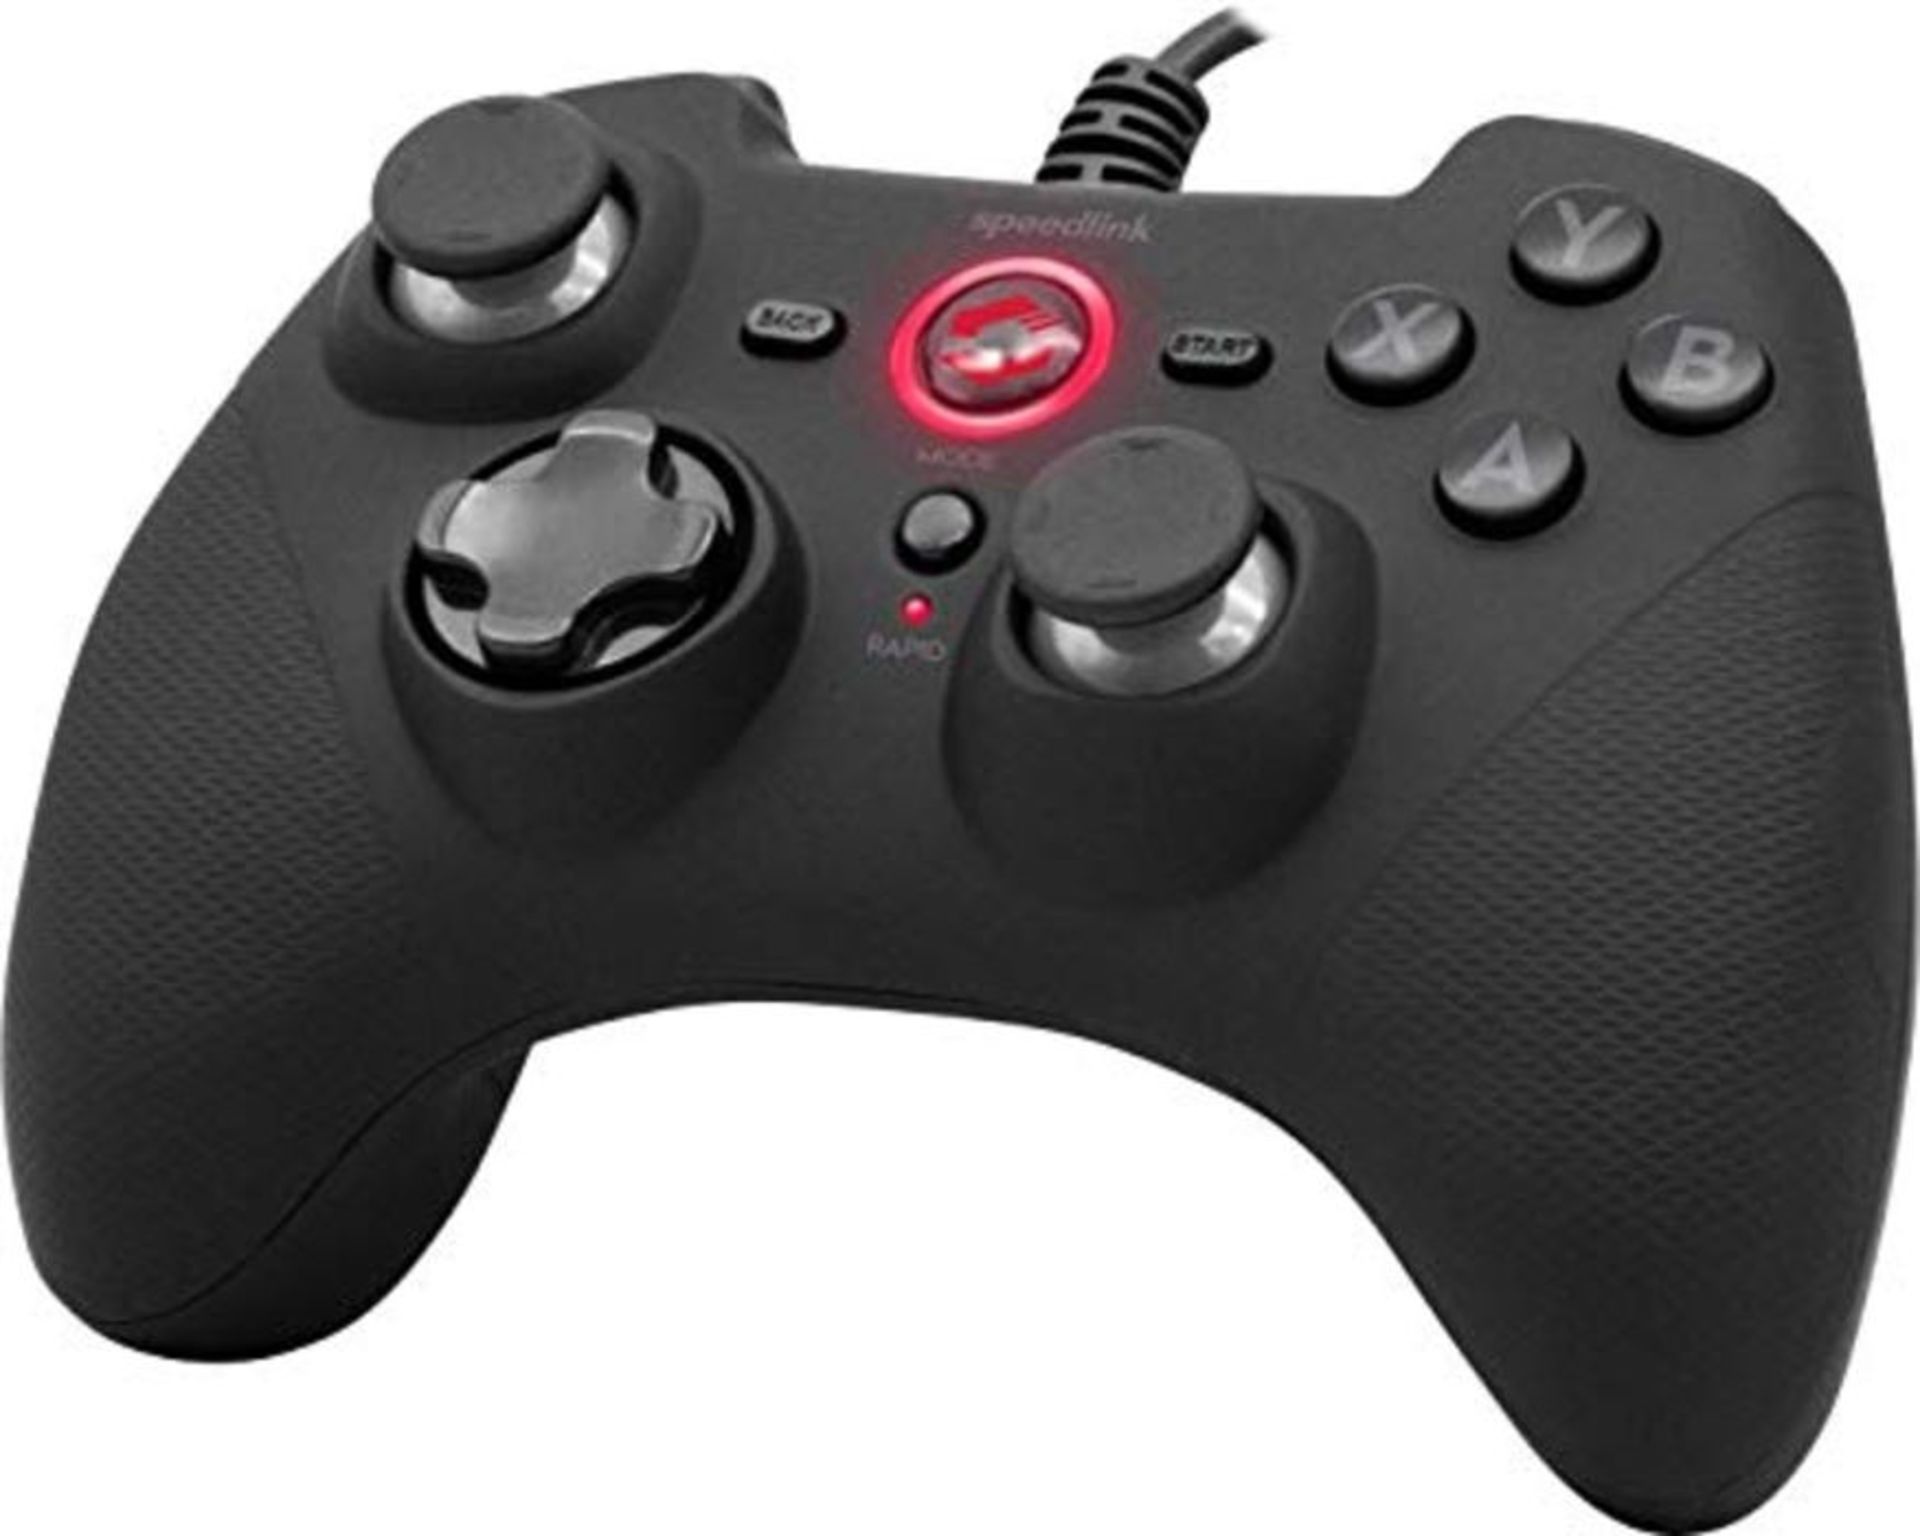 Speedlink RAIT Gamepad - wired gamepad with vibration function, for PC/PS3/Switch, bla